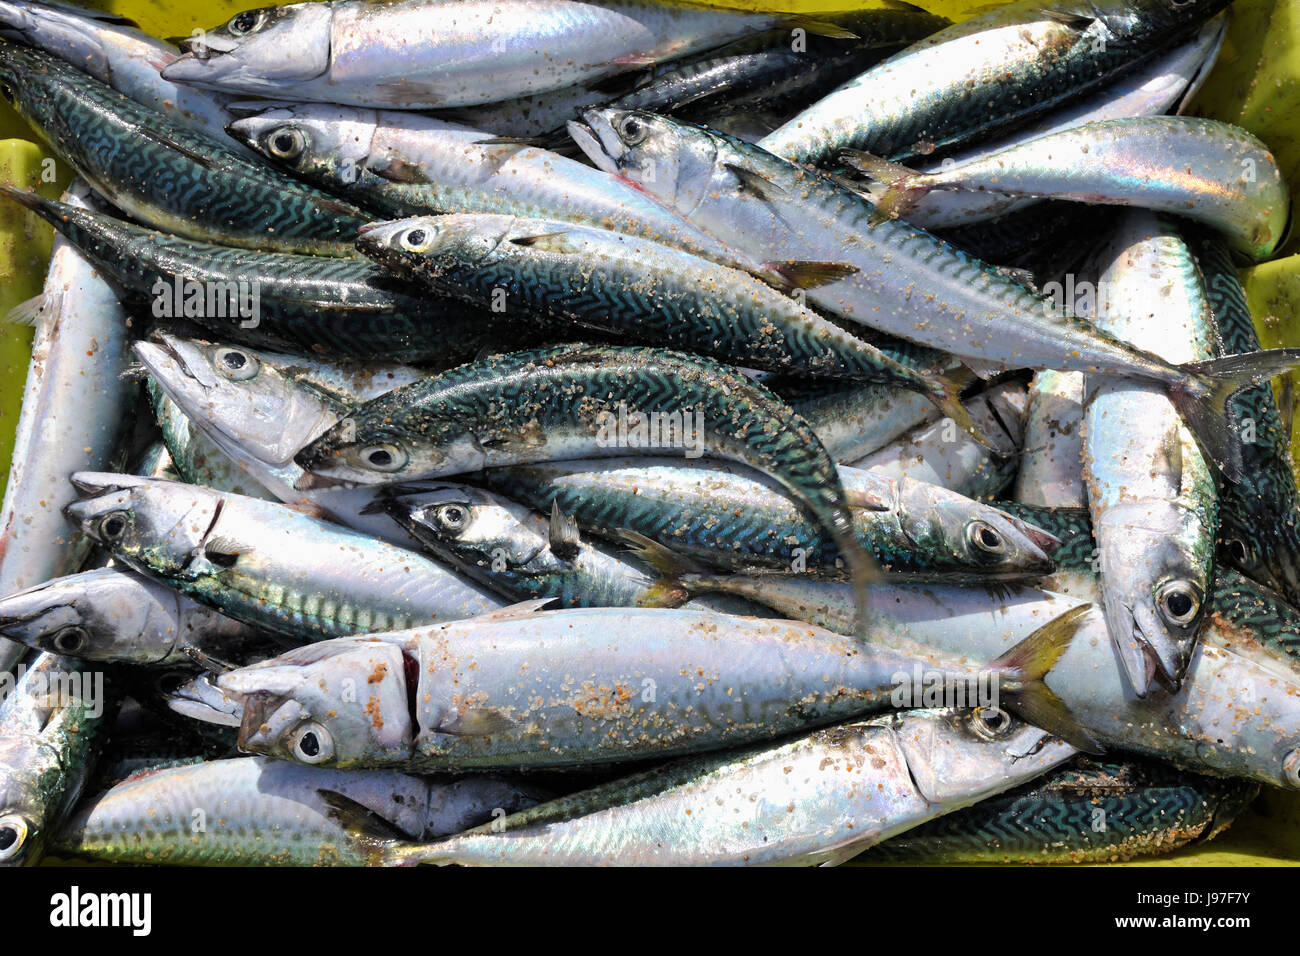 Chub mackerel (Scomber japonicus) catched by the traditional